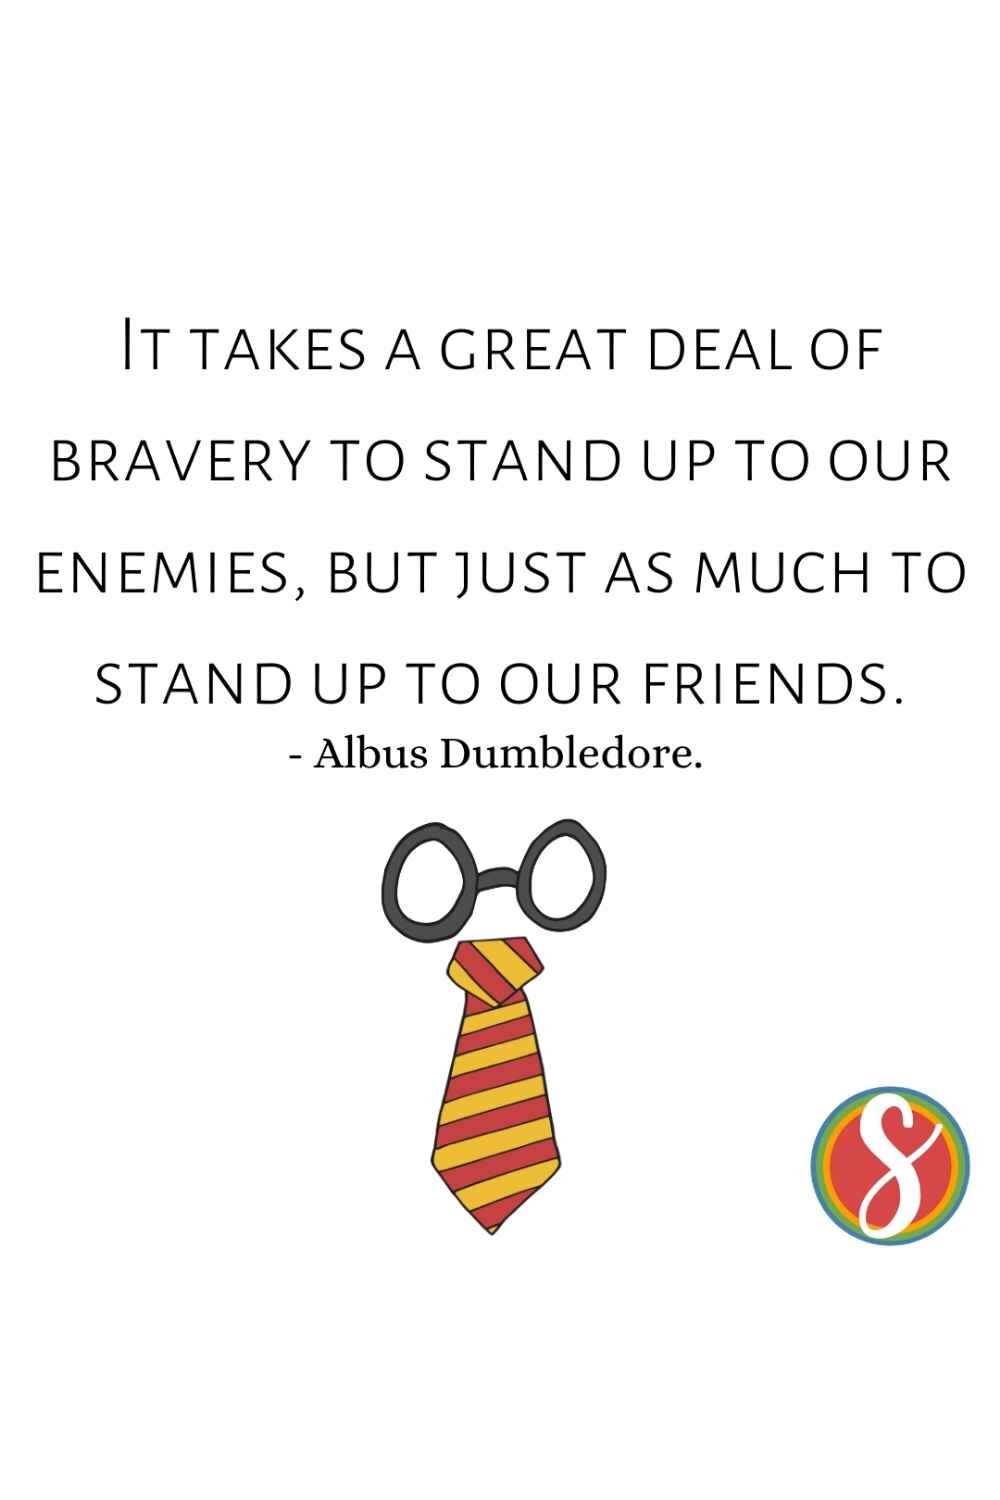 Printable Harry Potter Quote Cards – The Modern Simplest